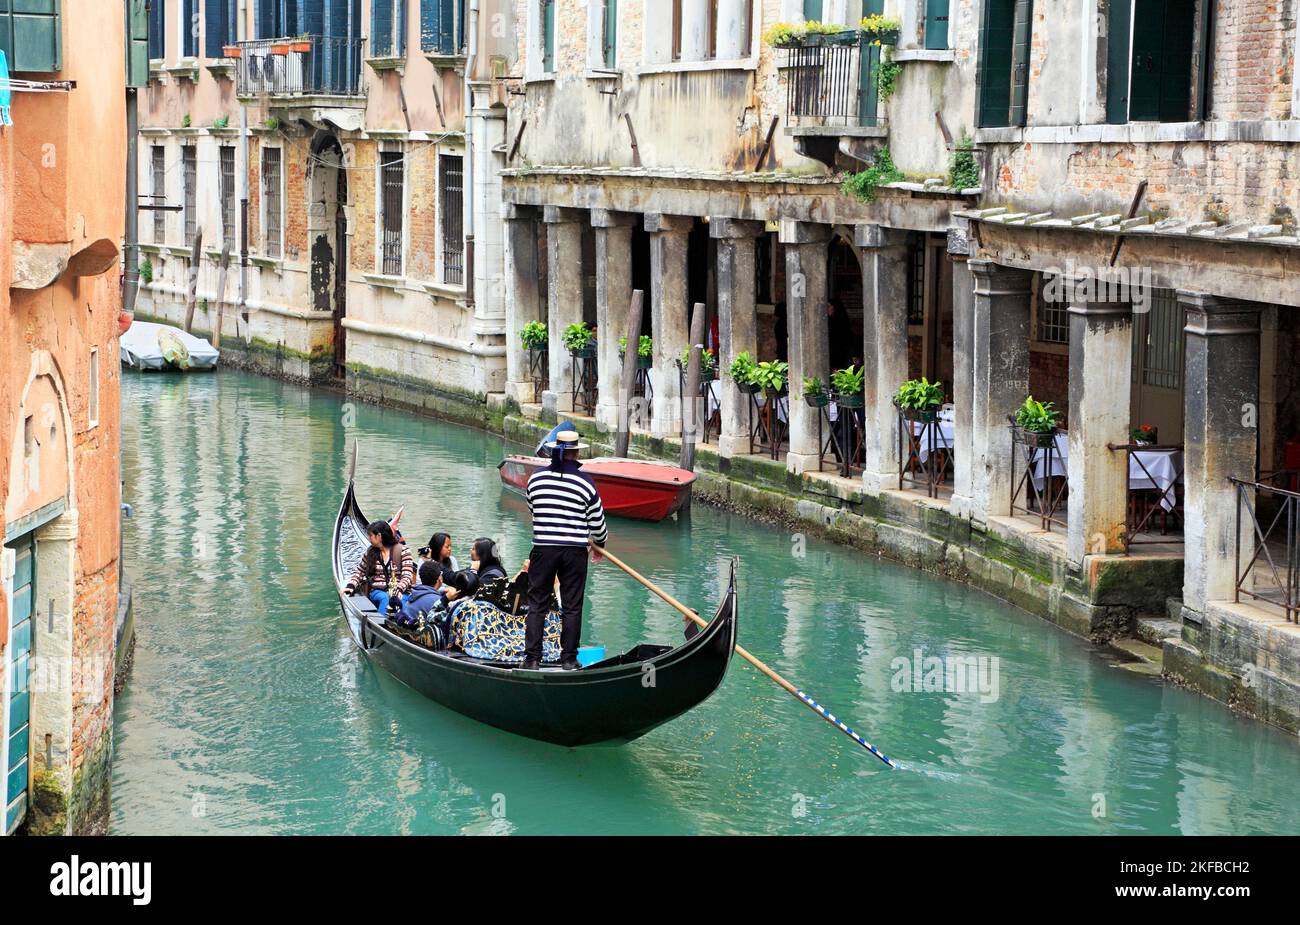 Venice, Italy. Gondoliere steering a gondola with tourists in a narrow canal surrounded by old buildings Stock Photo